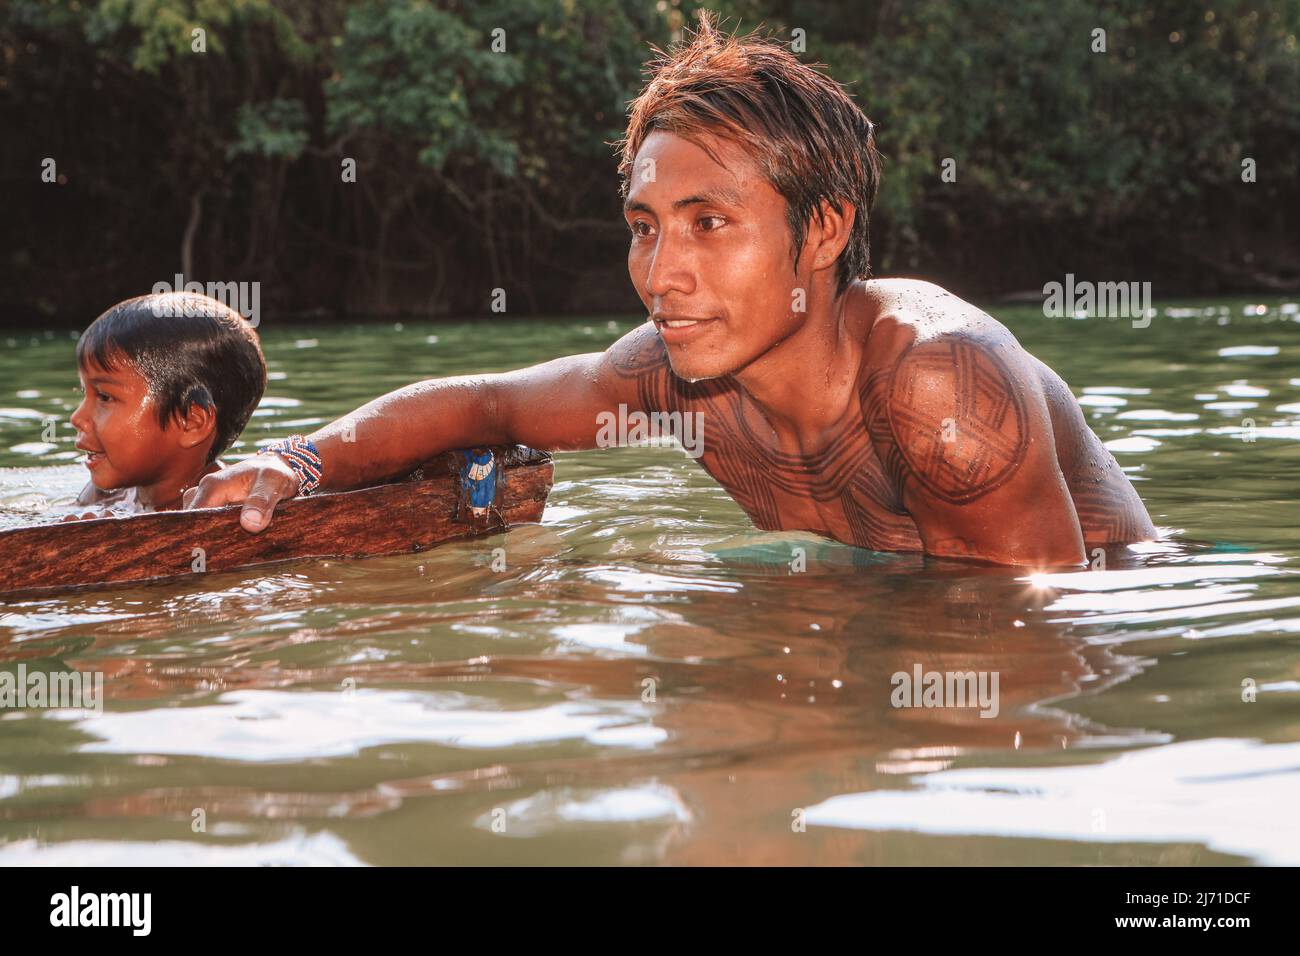 Young indian man from the Asurini Amazon tribe bathing in the Xingu  River. Brazil, 2009. Stock Photo